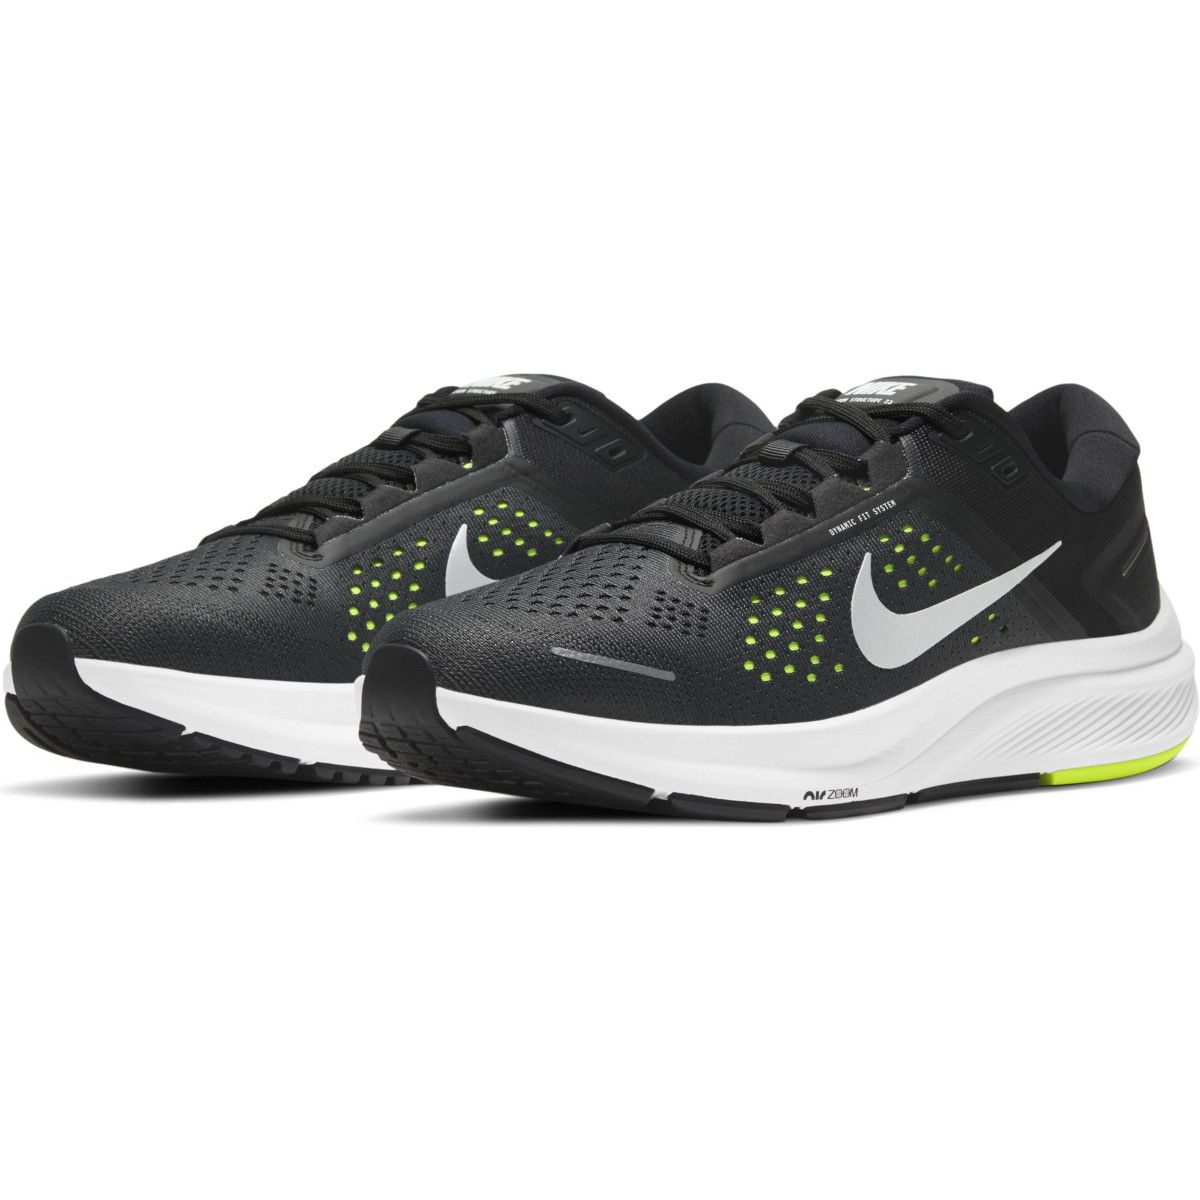 Nike Air Zoom Structure 23 Men's Running Shoes CZ6720-010